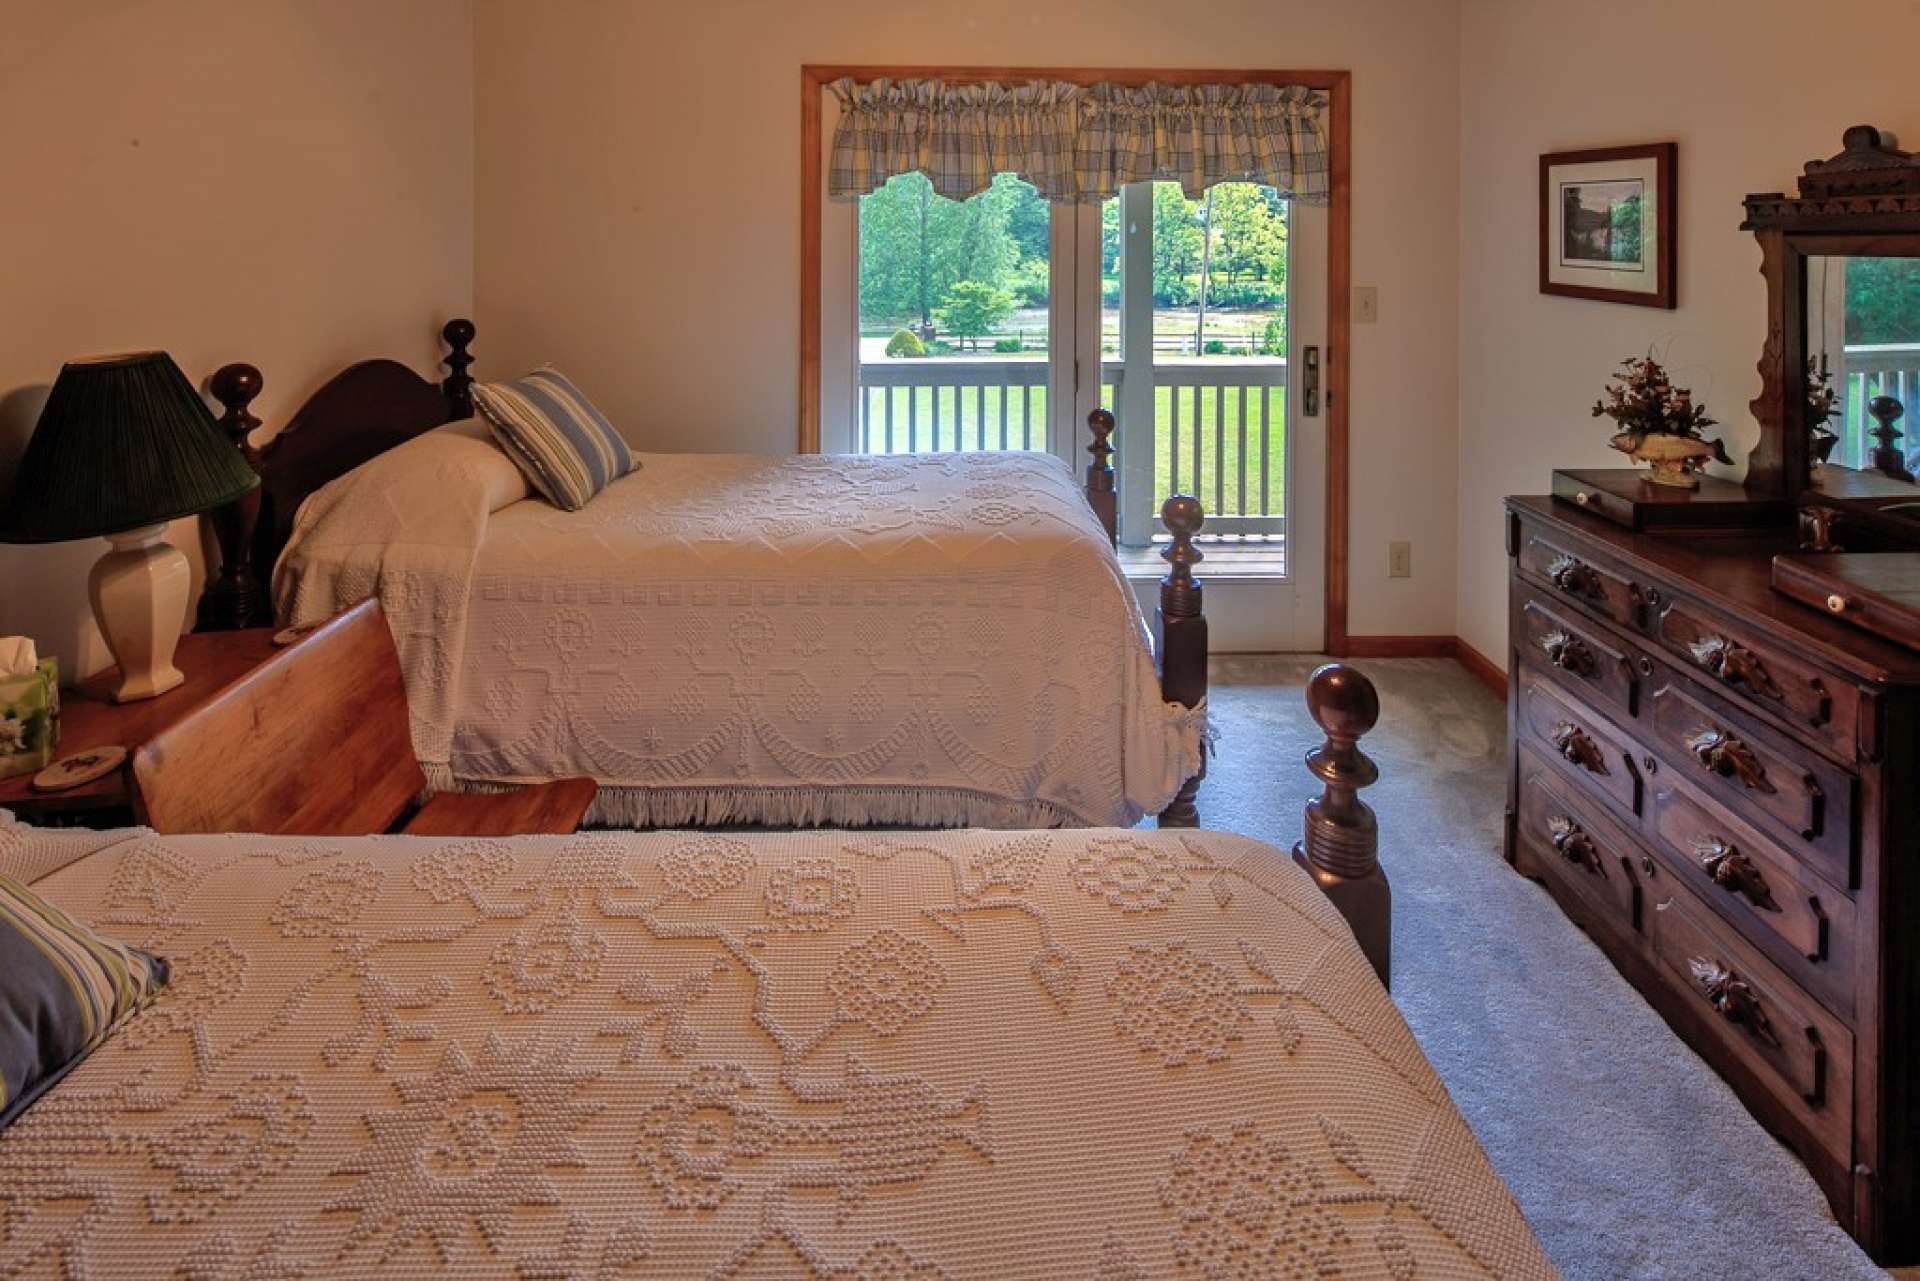 The third upper level bedroom features access to the upper level covered balcony.